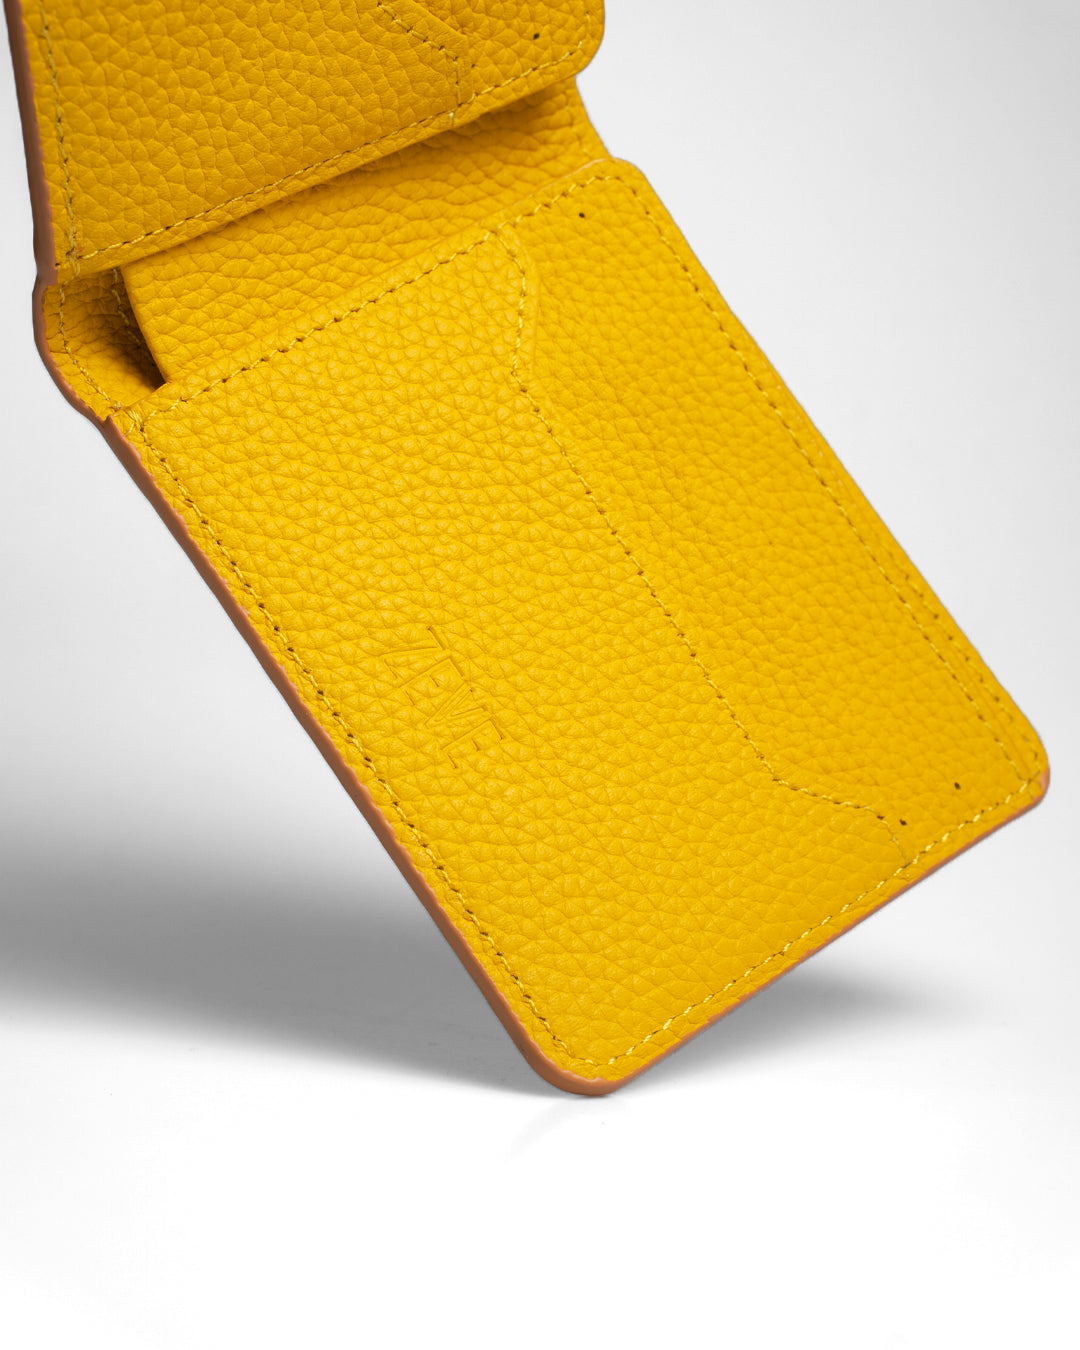 Artemis Python Wallet - Light Brown and Yellow Leather